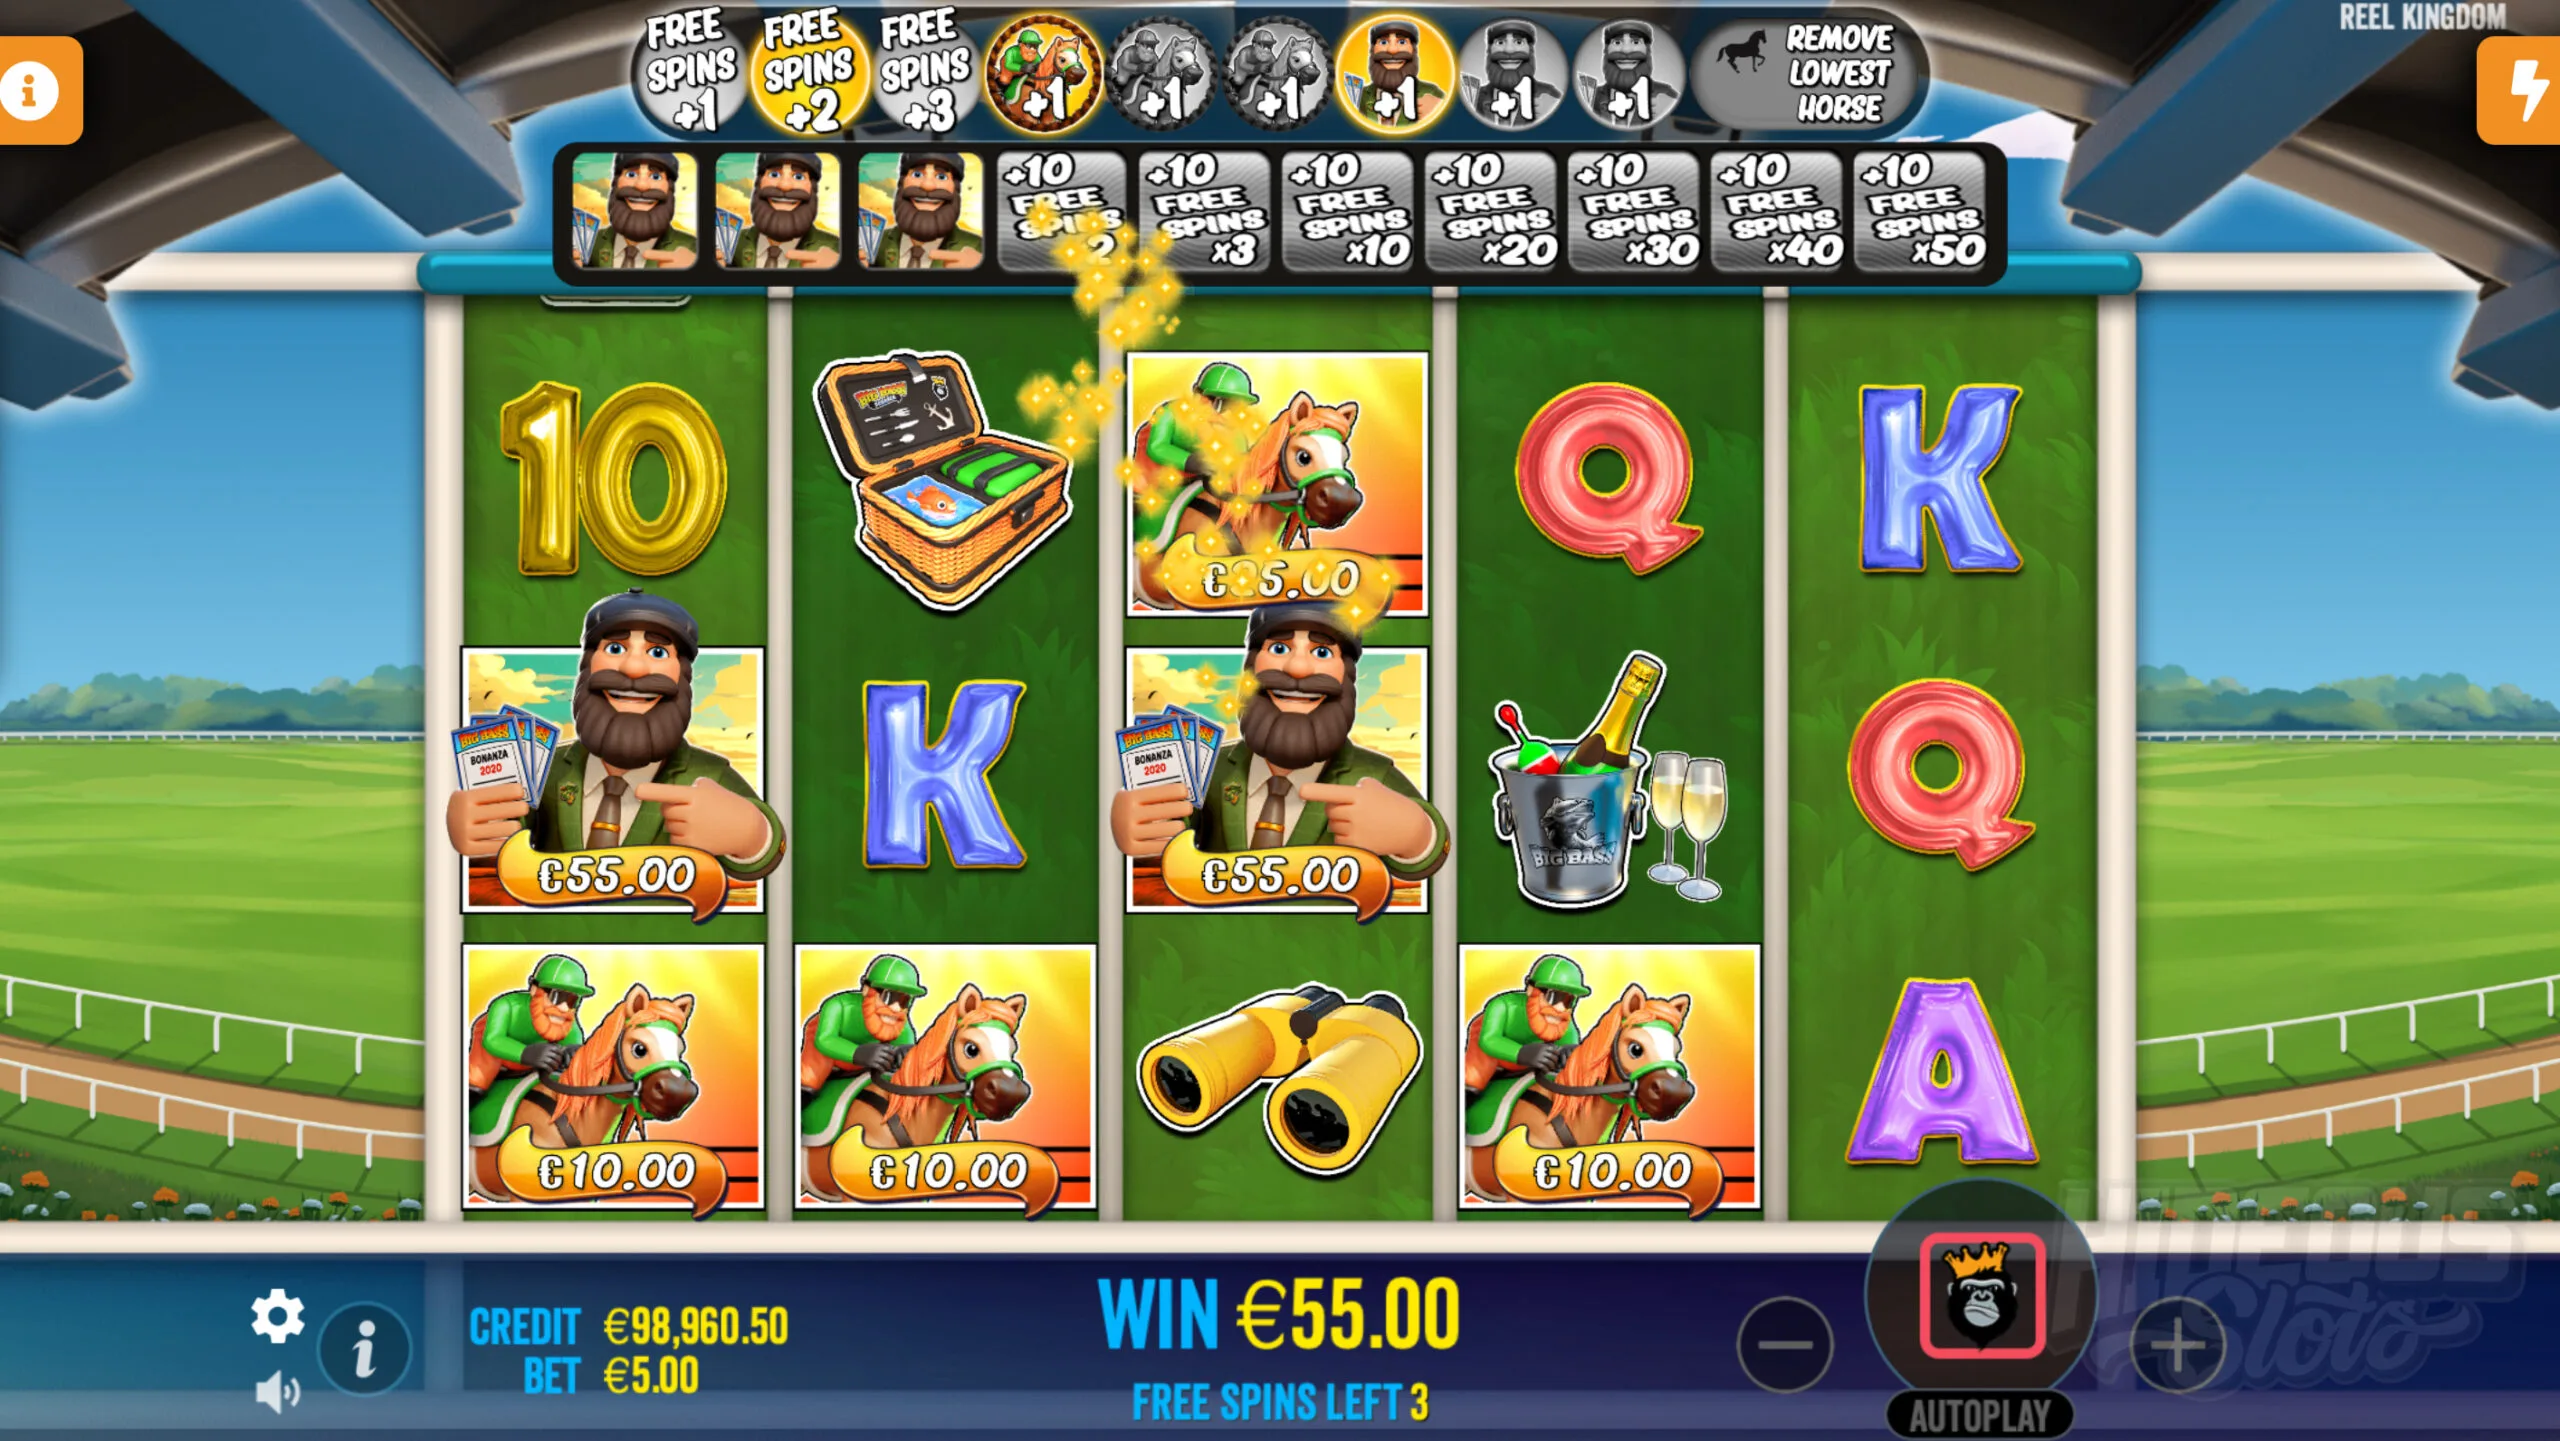 All Man Wild Symbols are Collected and Added to the Meter at the Top of the Reels During Free Spins